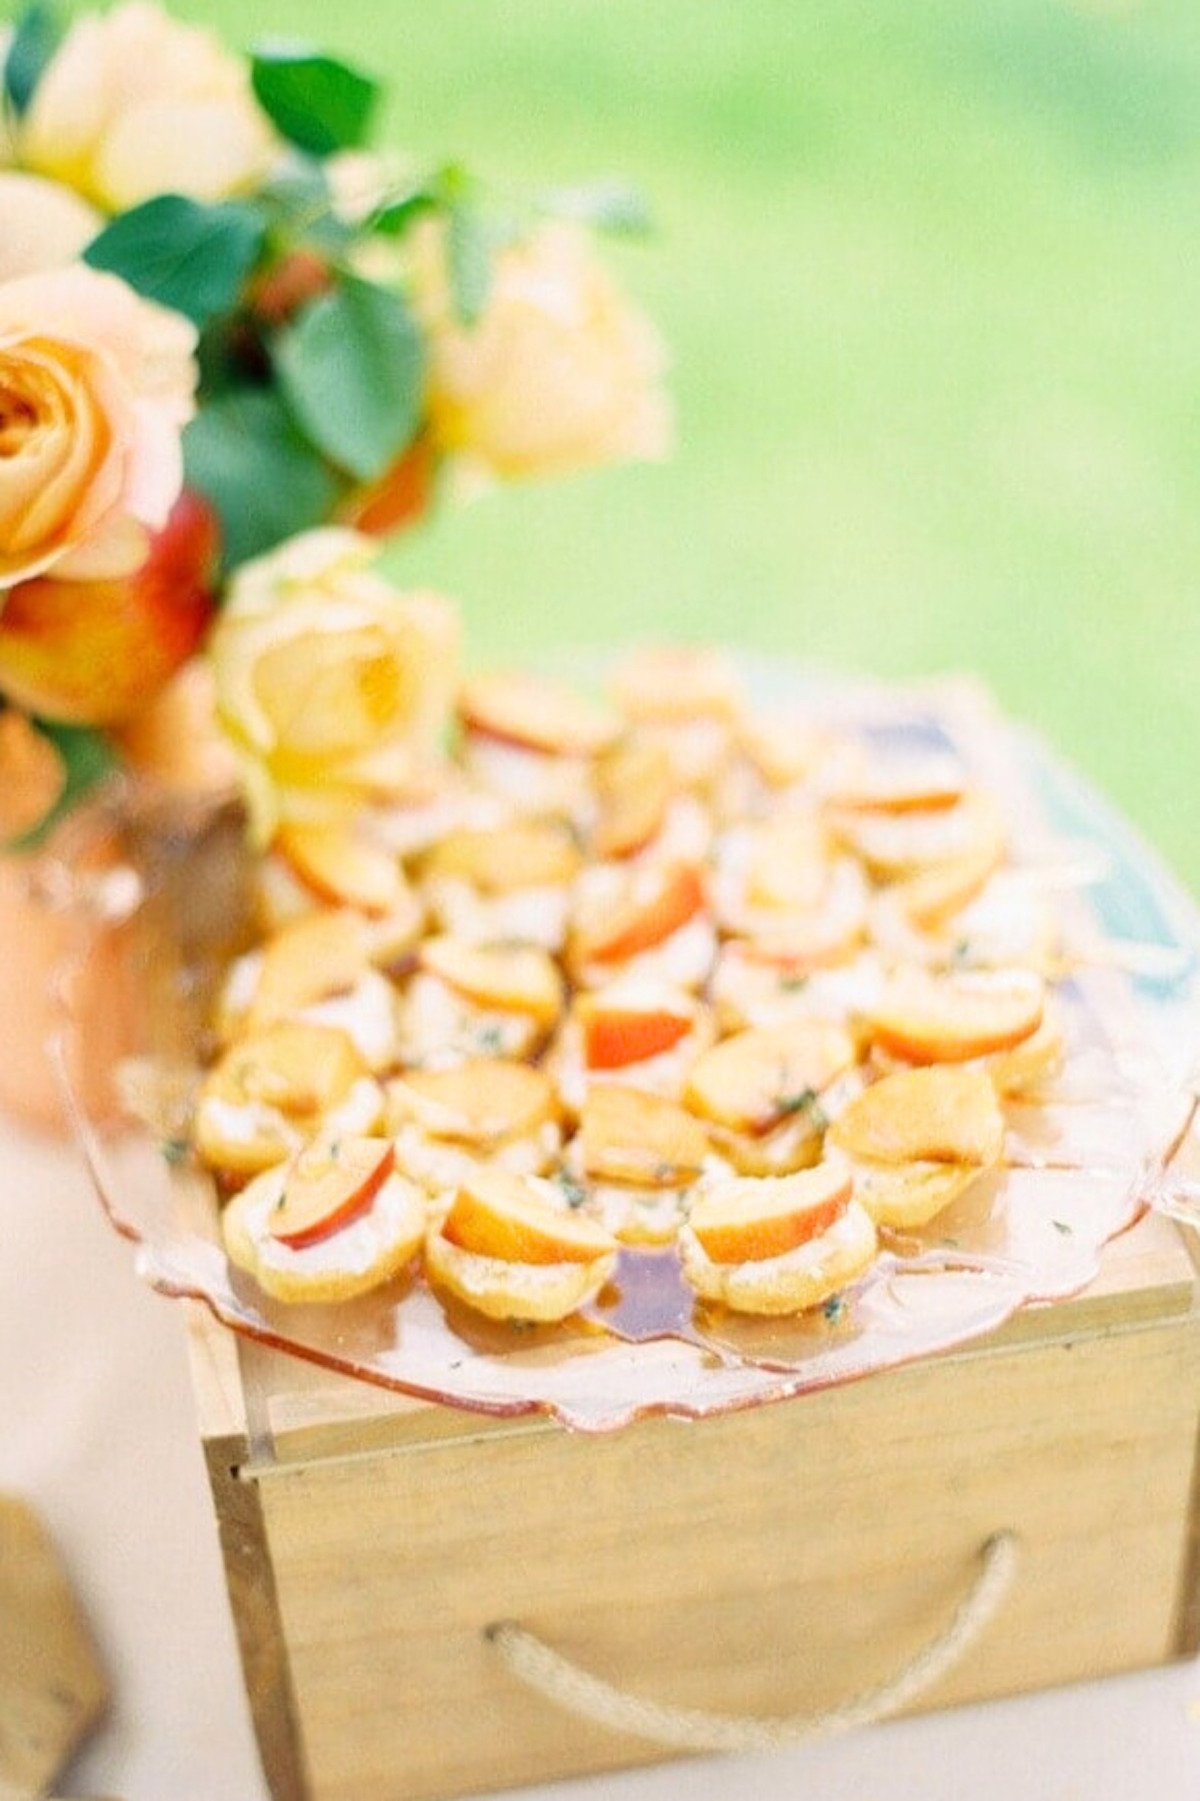 These peach crostini are a great summer appetizer that are easy to make and a real crowd pleaser. They are perfect for entertaining and best served with a glass of chilled prosecco in the garden!